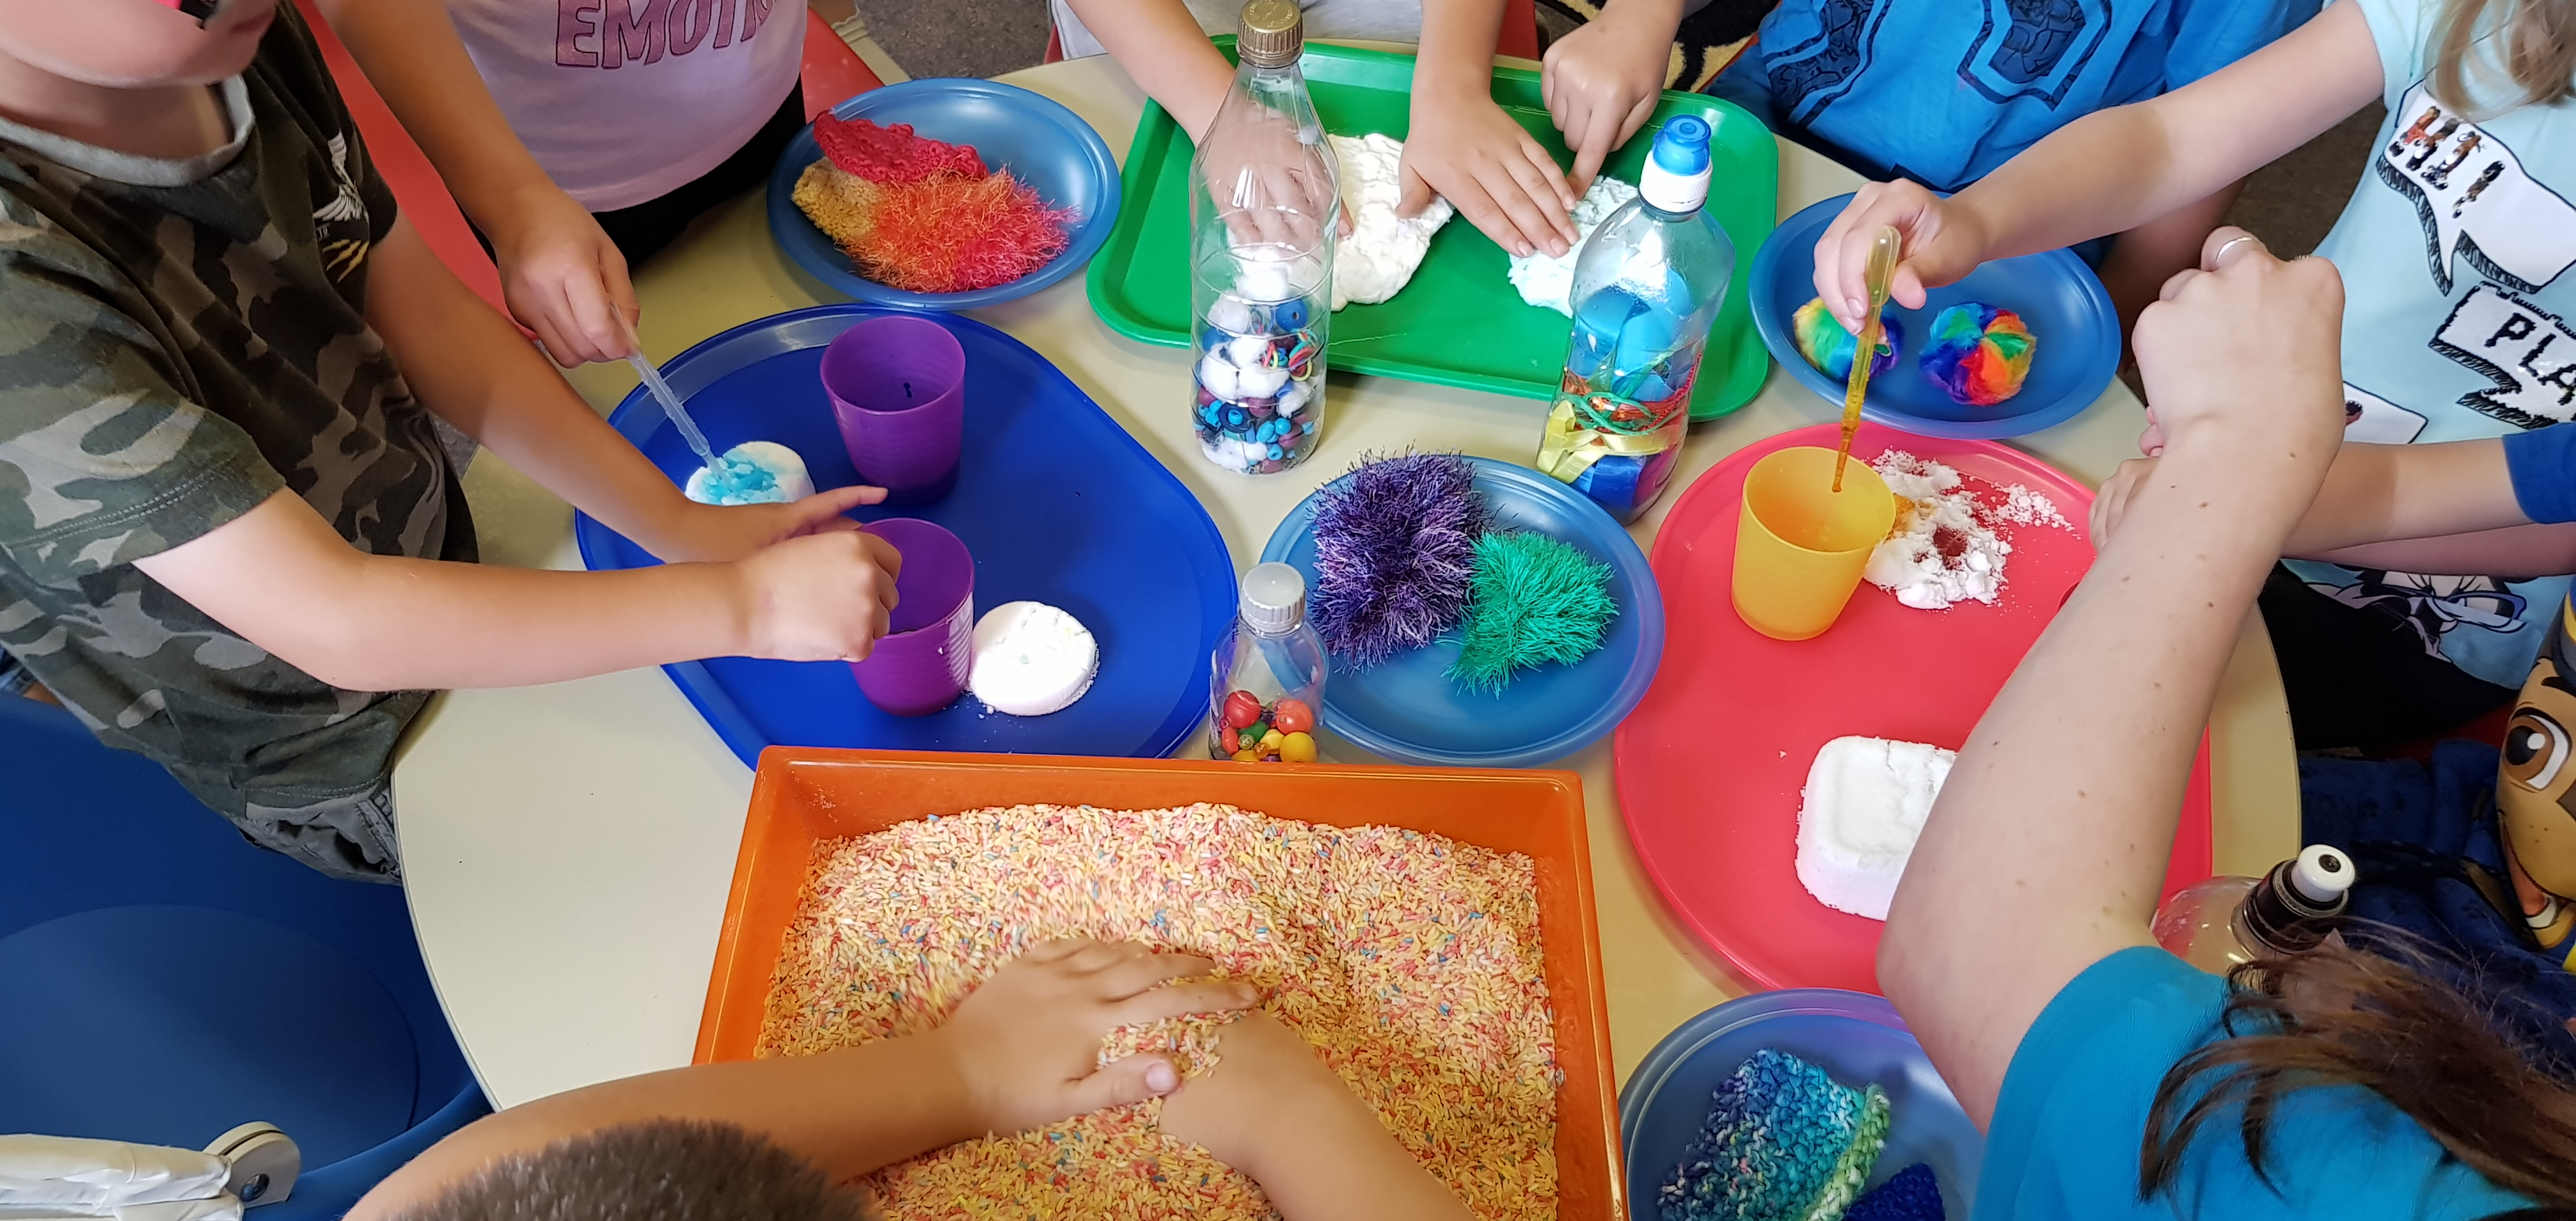 Hands of children touching different sensory items